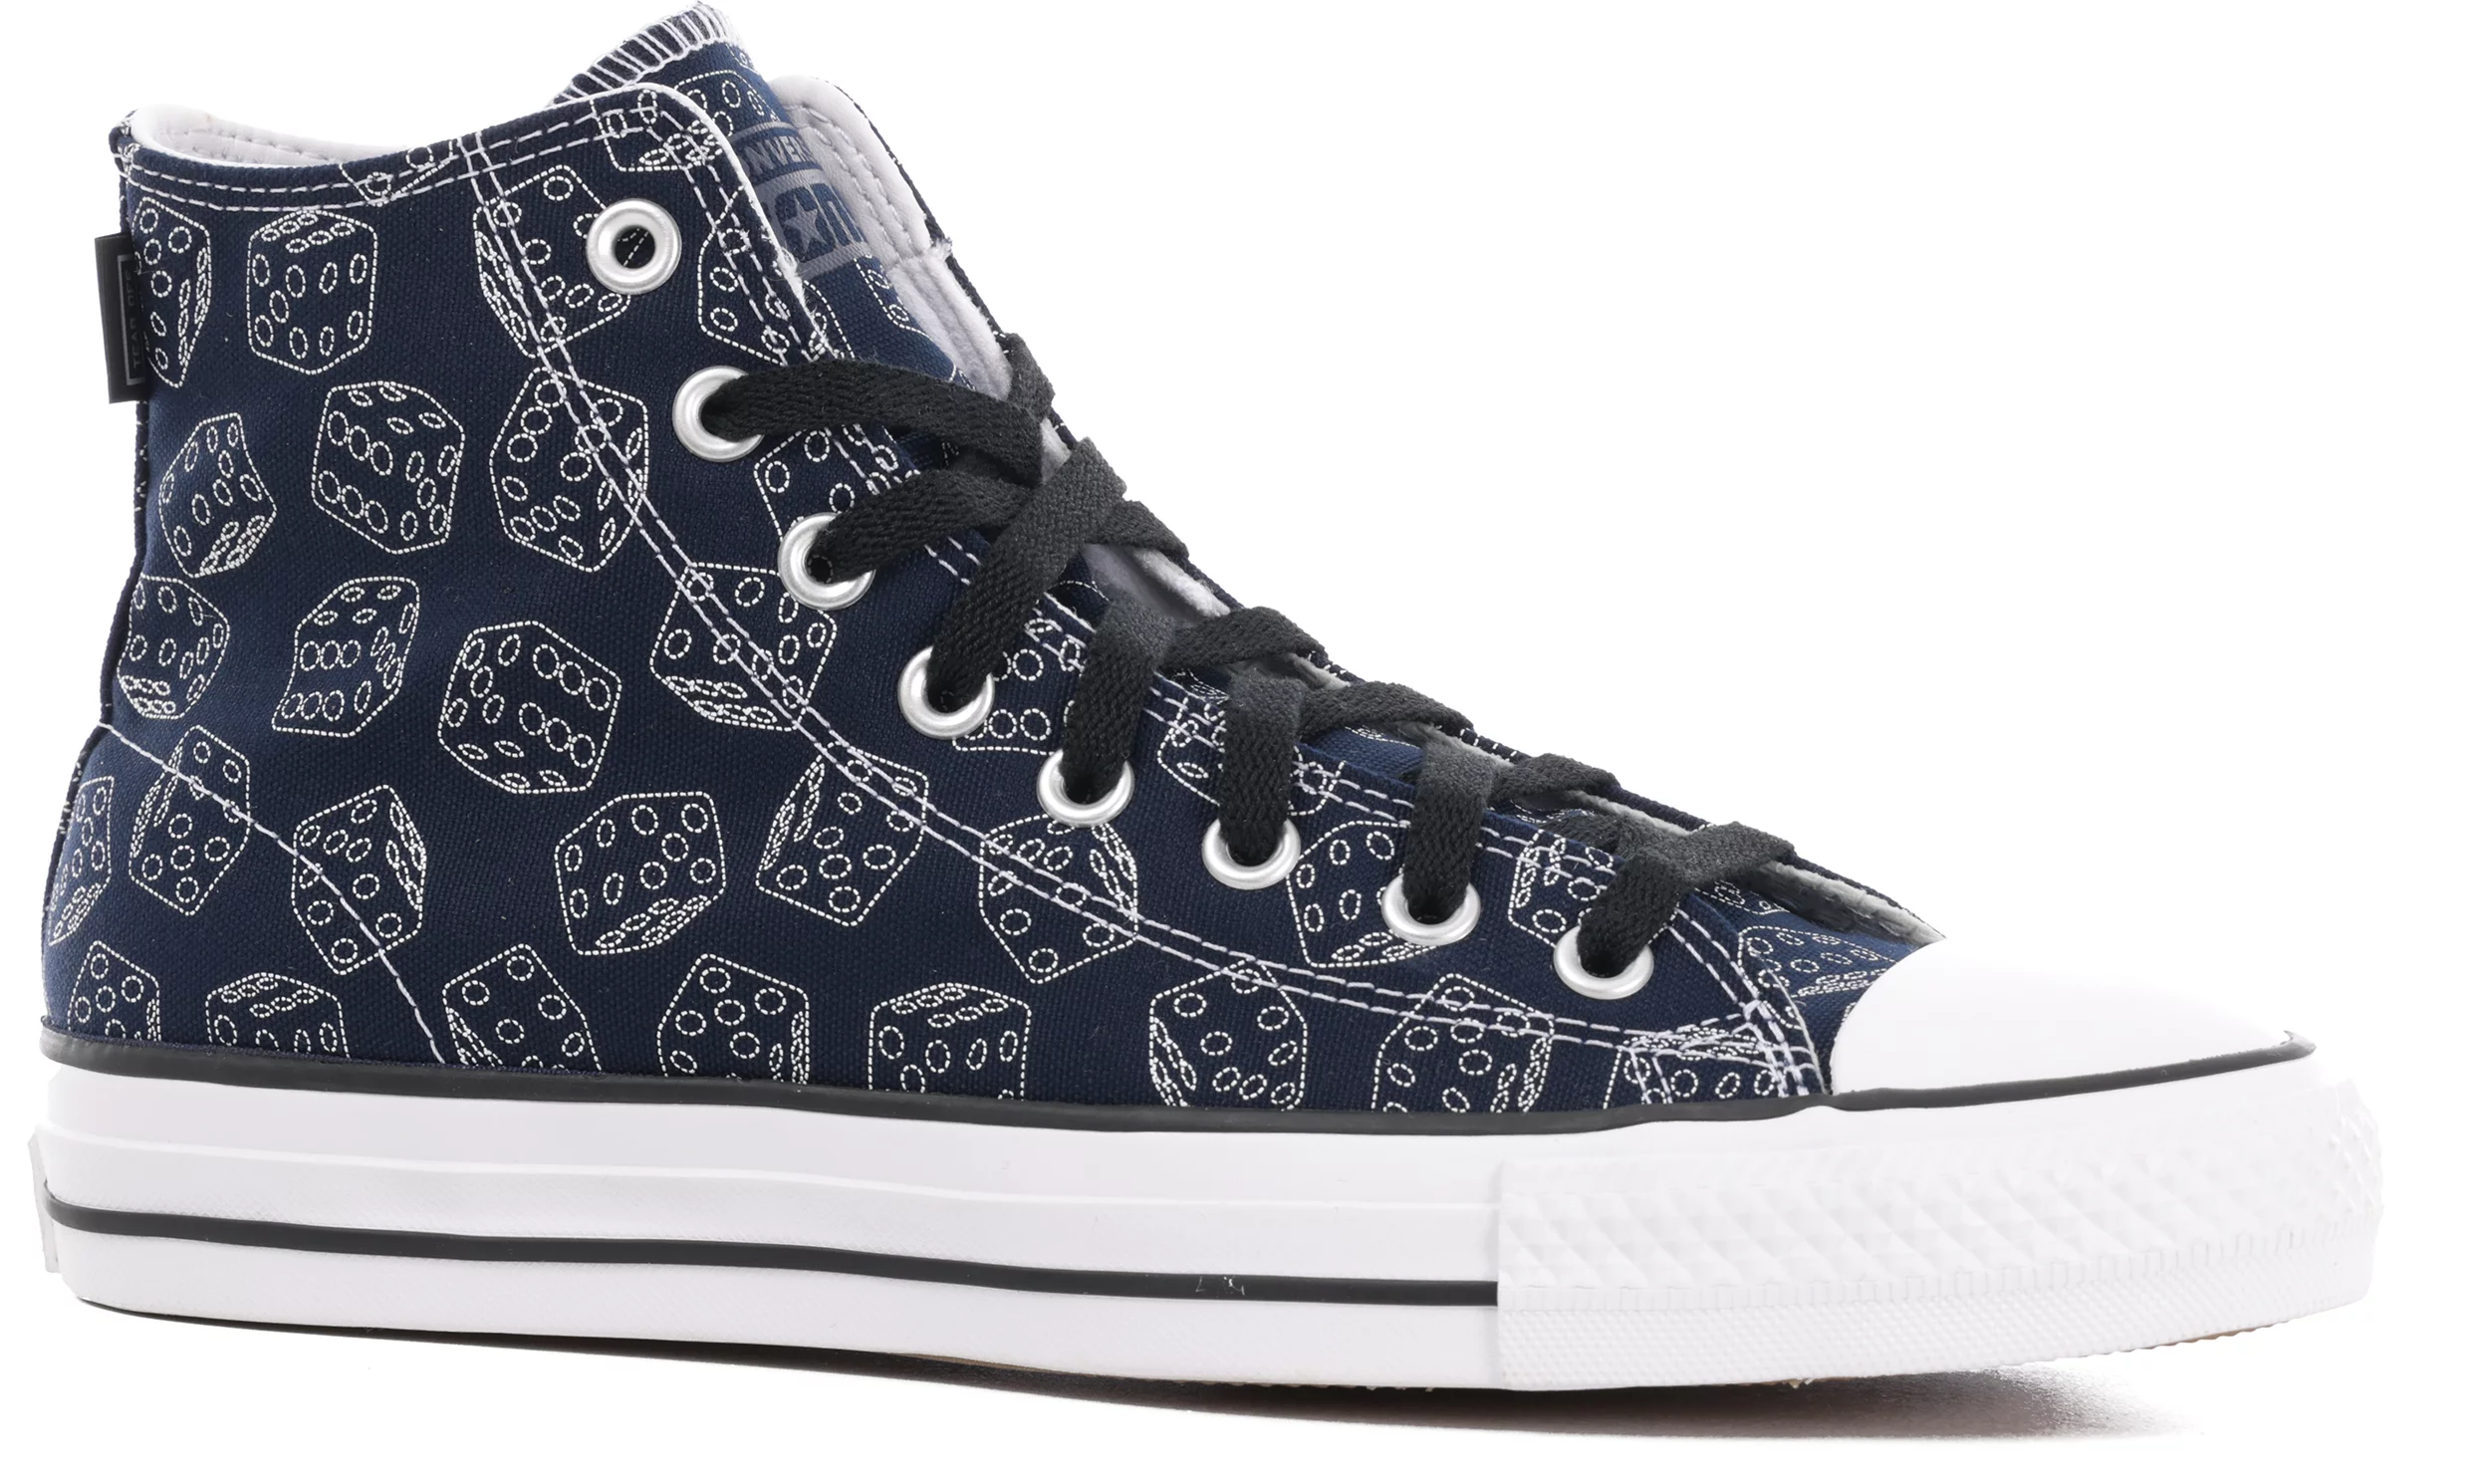 Converse Chuck Taylor All Star Pro High Skate Shoes - (dice print)  obsidian/black/white | Tactics